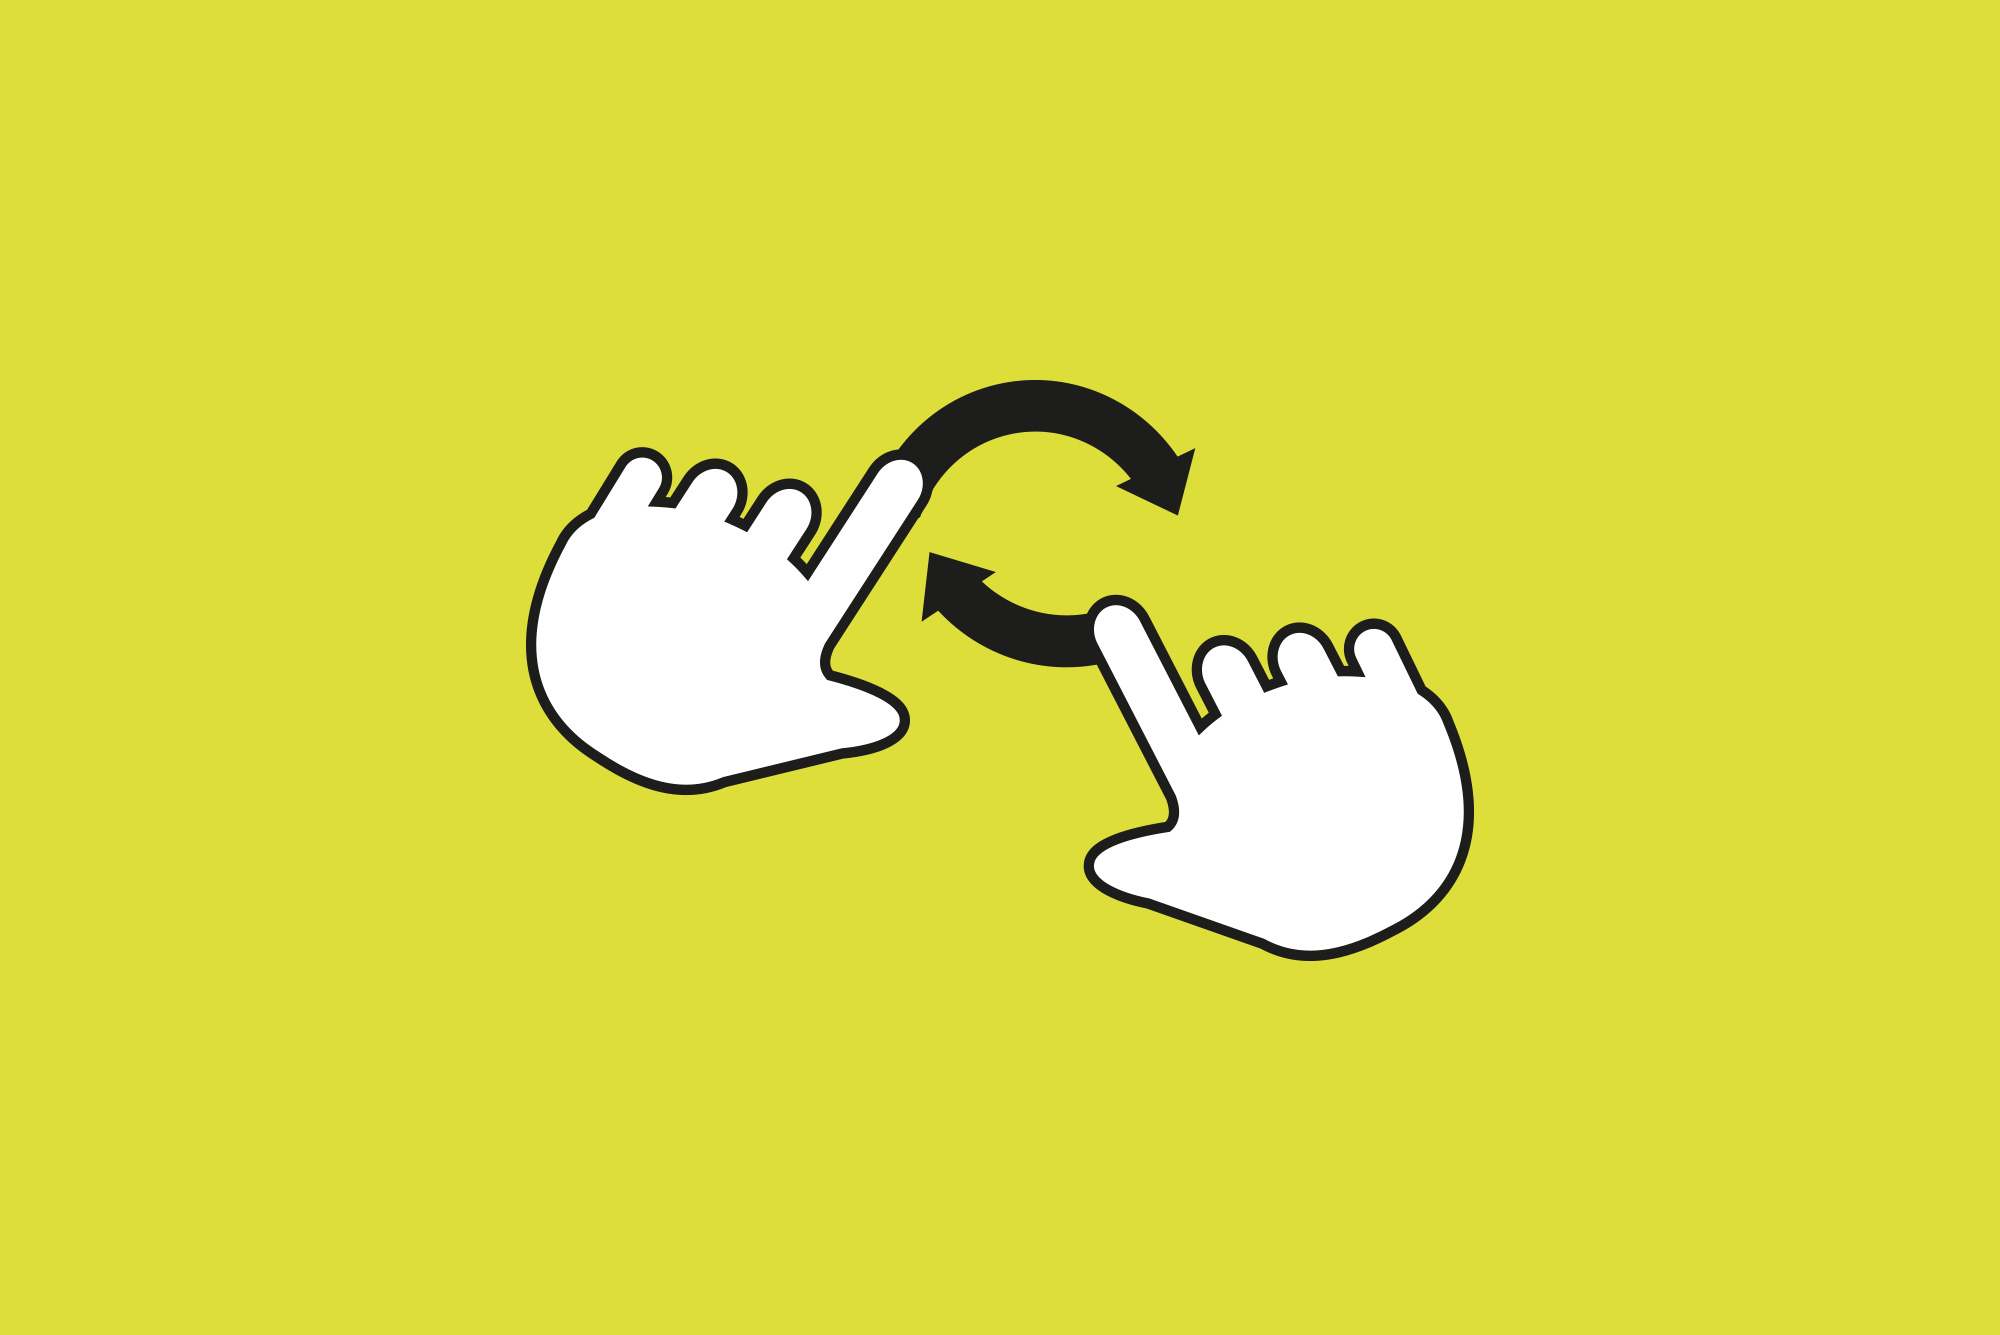 Hands making gestures on yellow background